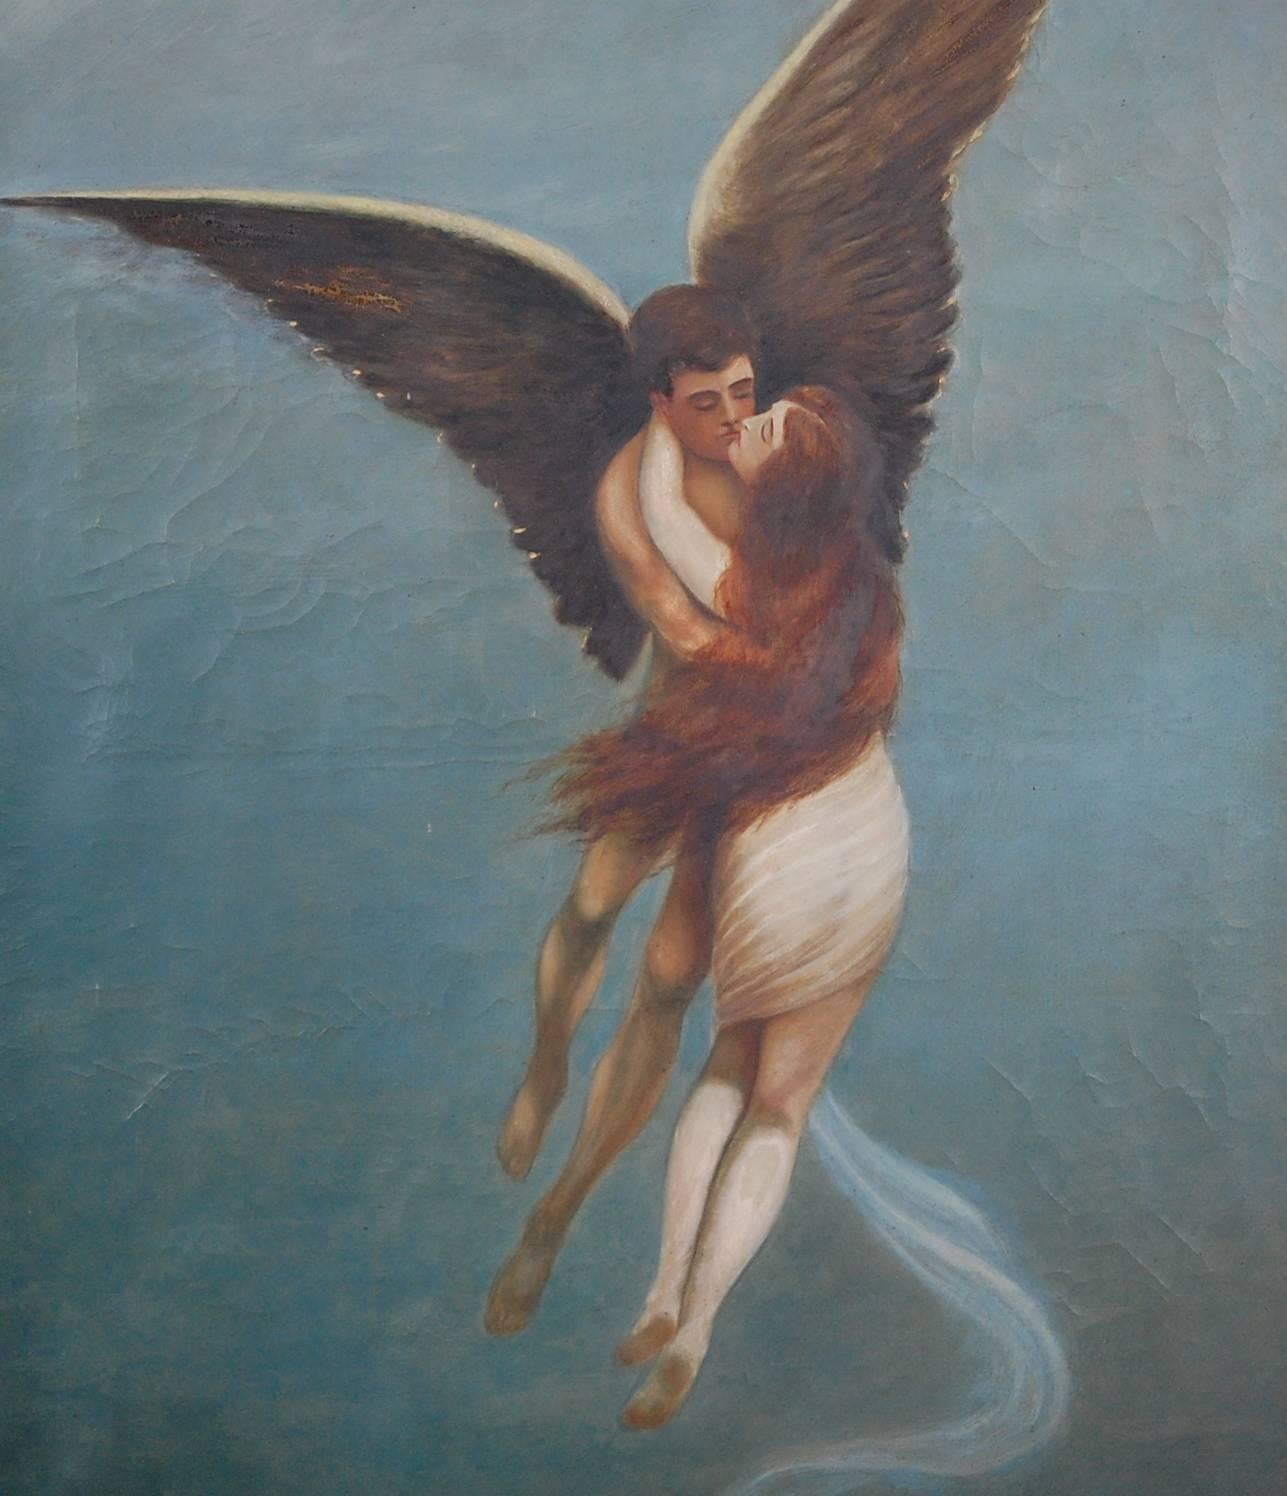 Late 19th century large oil on canvas depicting an angel ascending up to heaven with a subject. Some light cracking to the paint in places but no paint loss or restoration. Original Victorian frame, with minor blemishes. This unattributed piece is